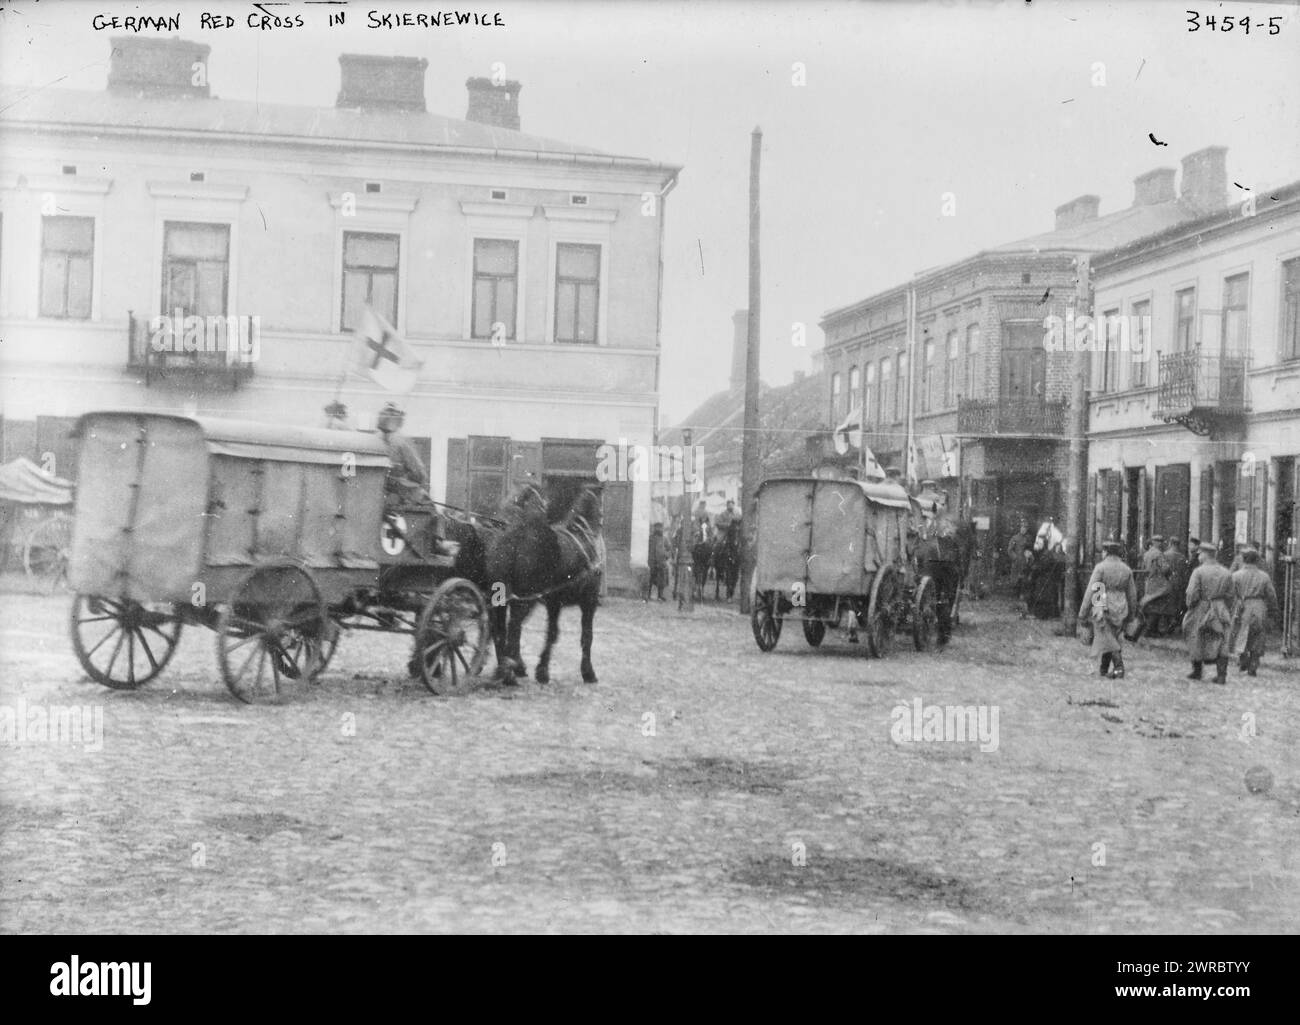 German Red Cross in Skiernewice, Photograph shows German Red Cross vehicles with flags in Skierniewice, Poland during World War I., between ca. 1910 and ca. 1915, World War, 1914-1918, Glass negatives, 1 negative: glass Stock Photo